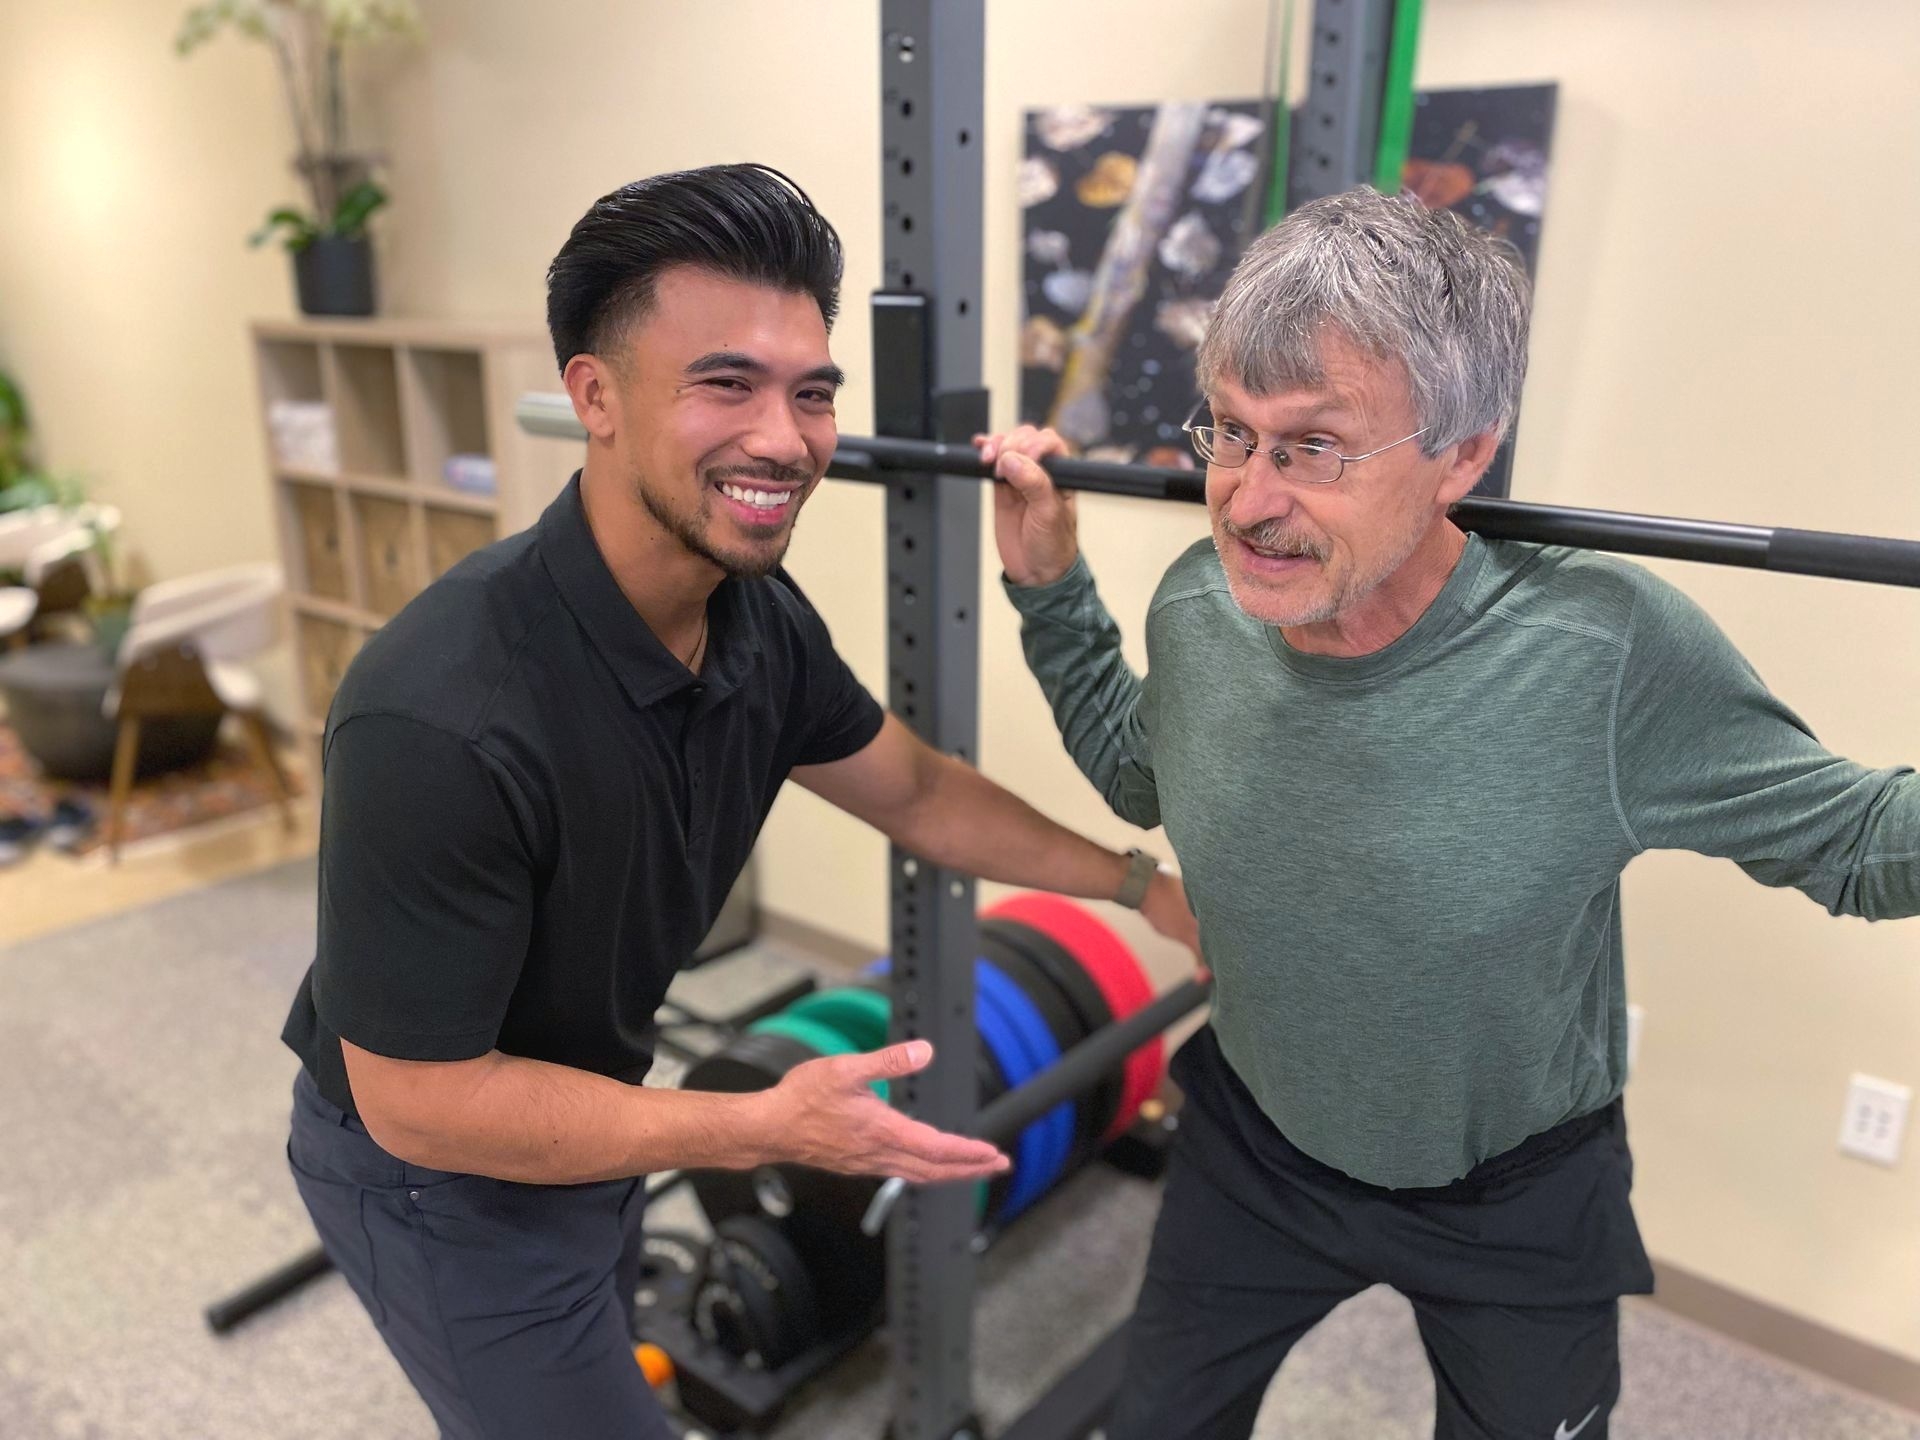 What types of exercises are typically included in a cardiac rehabilitation program?